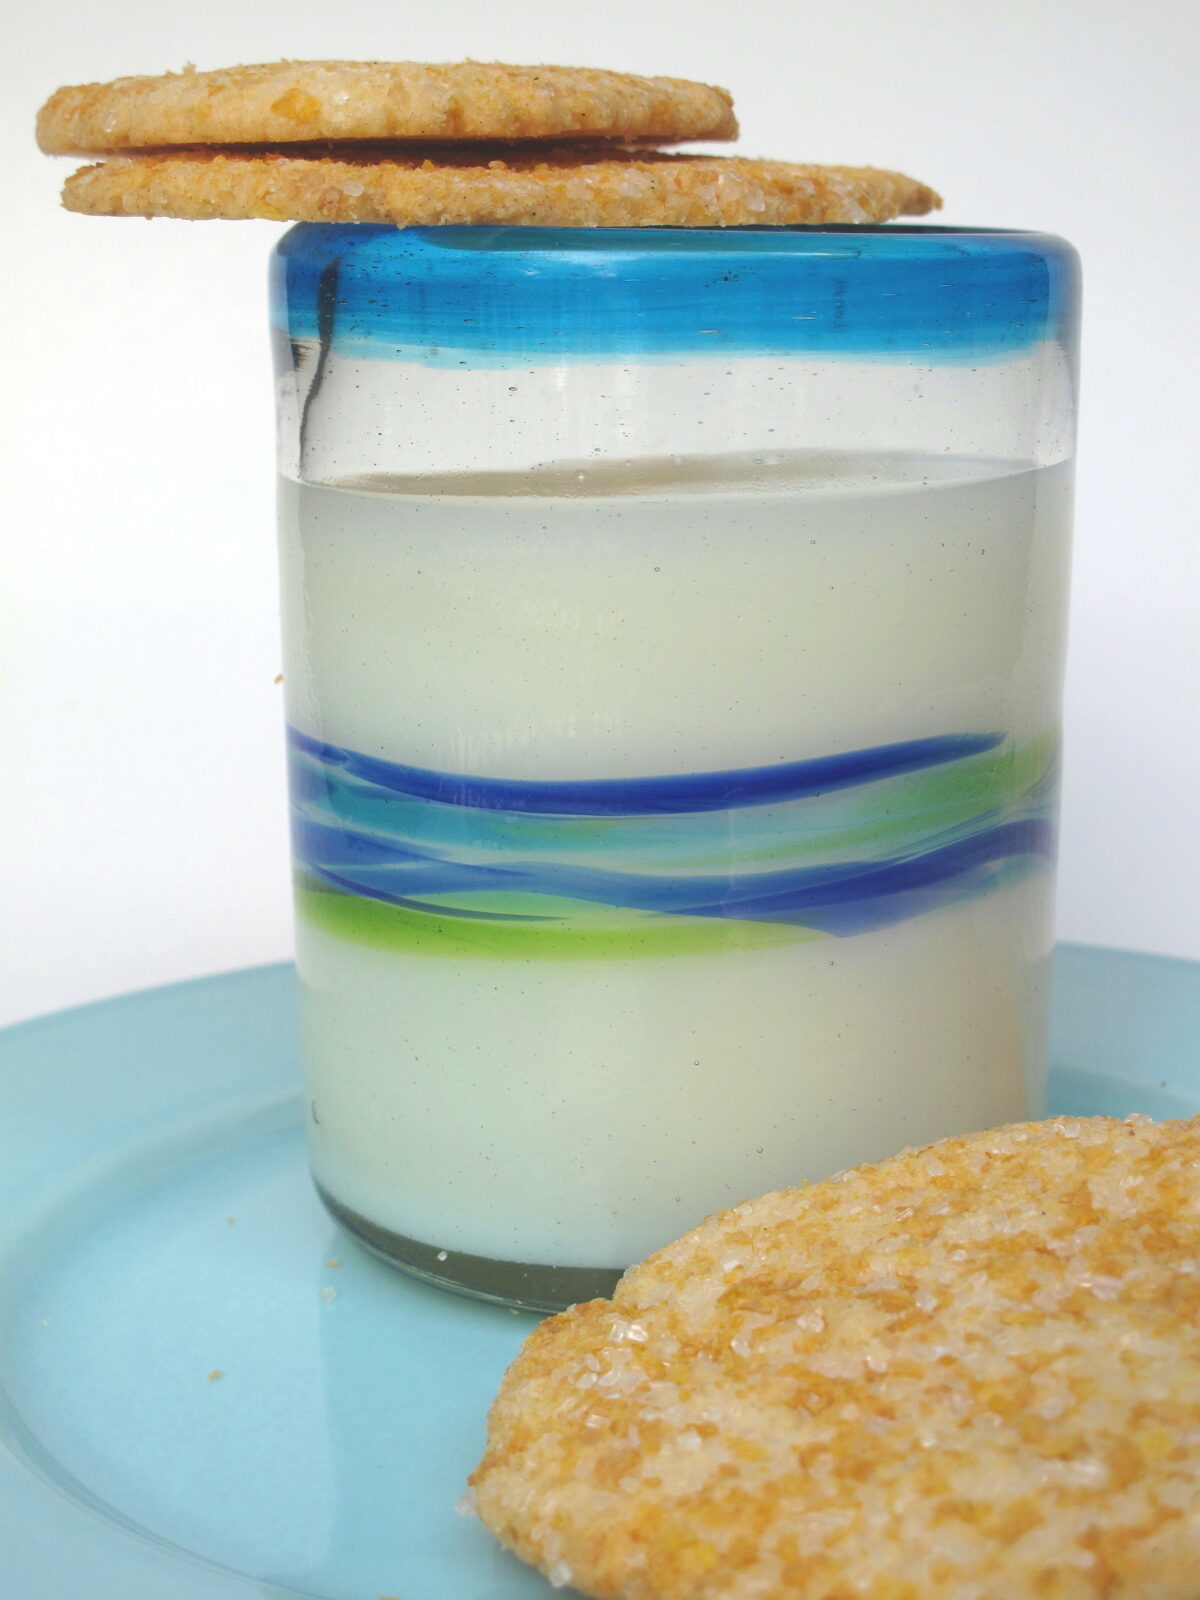 Two thin cookies balanced on the rim of a glass of milk.